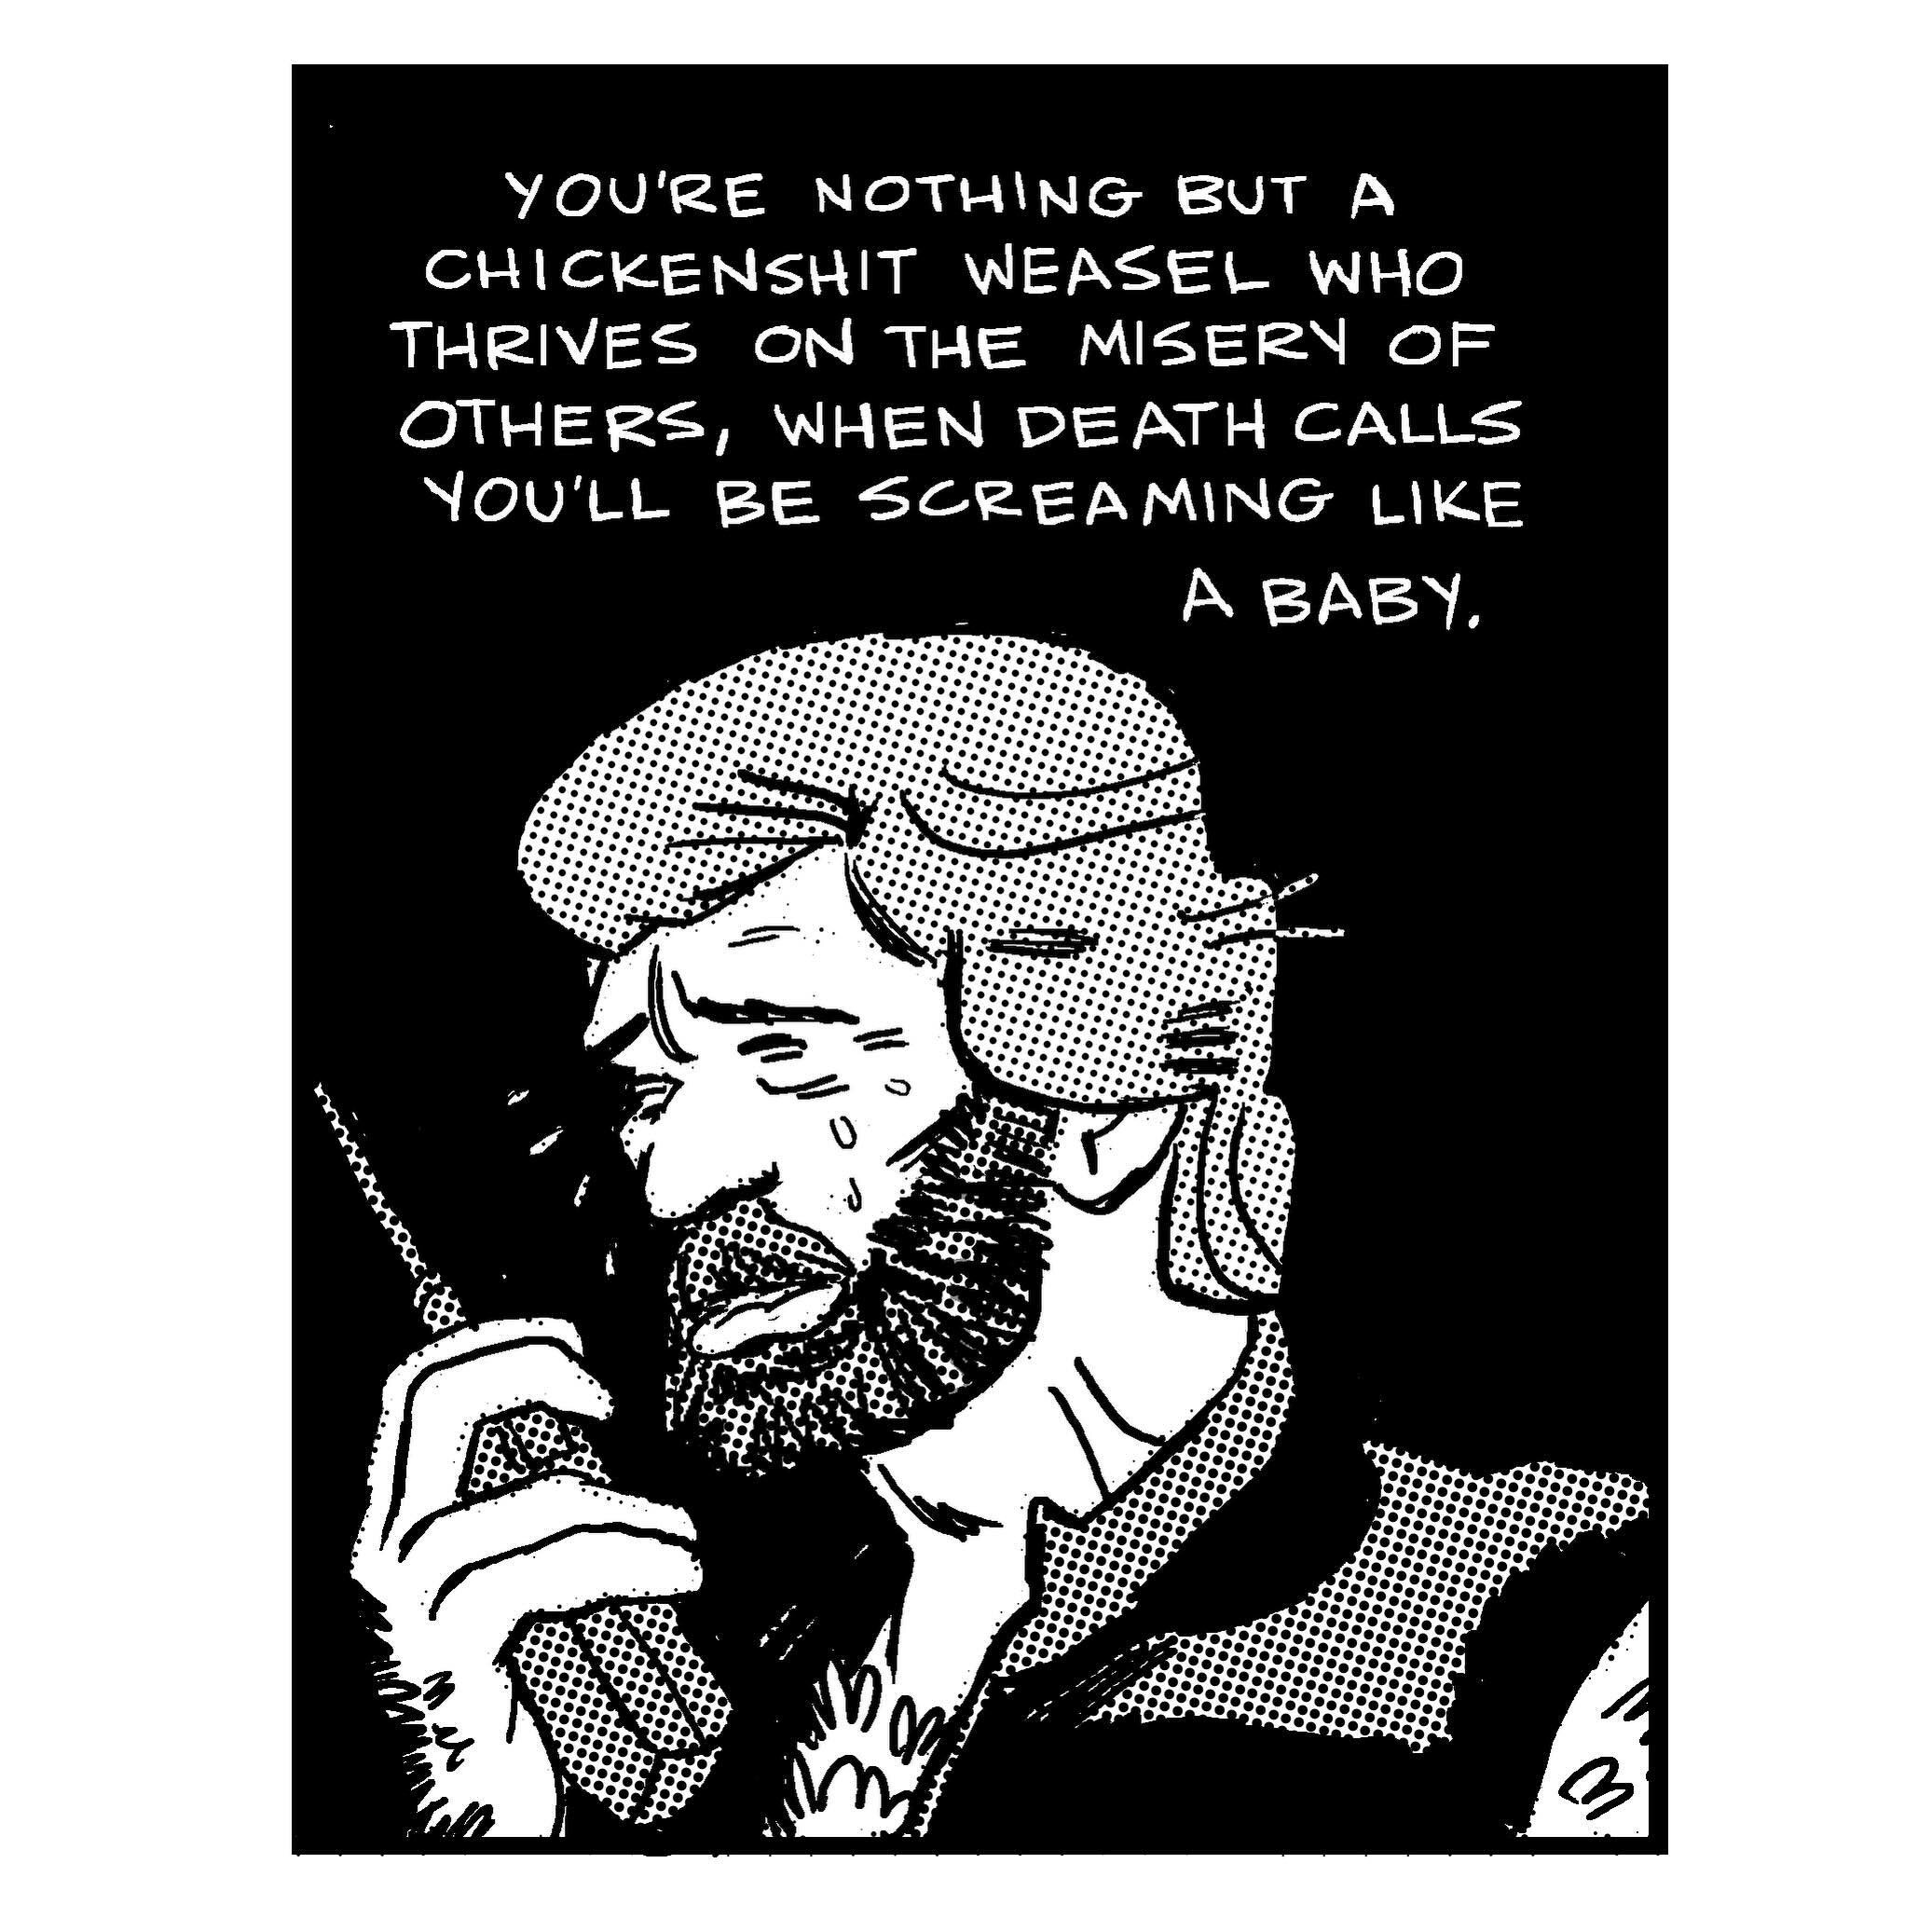 Ancient drawing of Chuck Norris in Delta Force 2. Actual  dialog.

For comics &amp; more join my NEWSLETTER at the link in bio. 
#comics #comicbooks #cartoonist #chucknorris